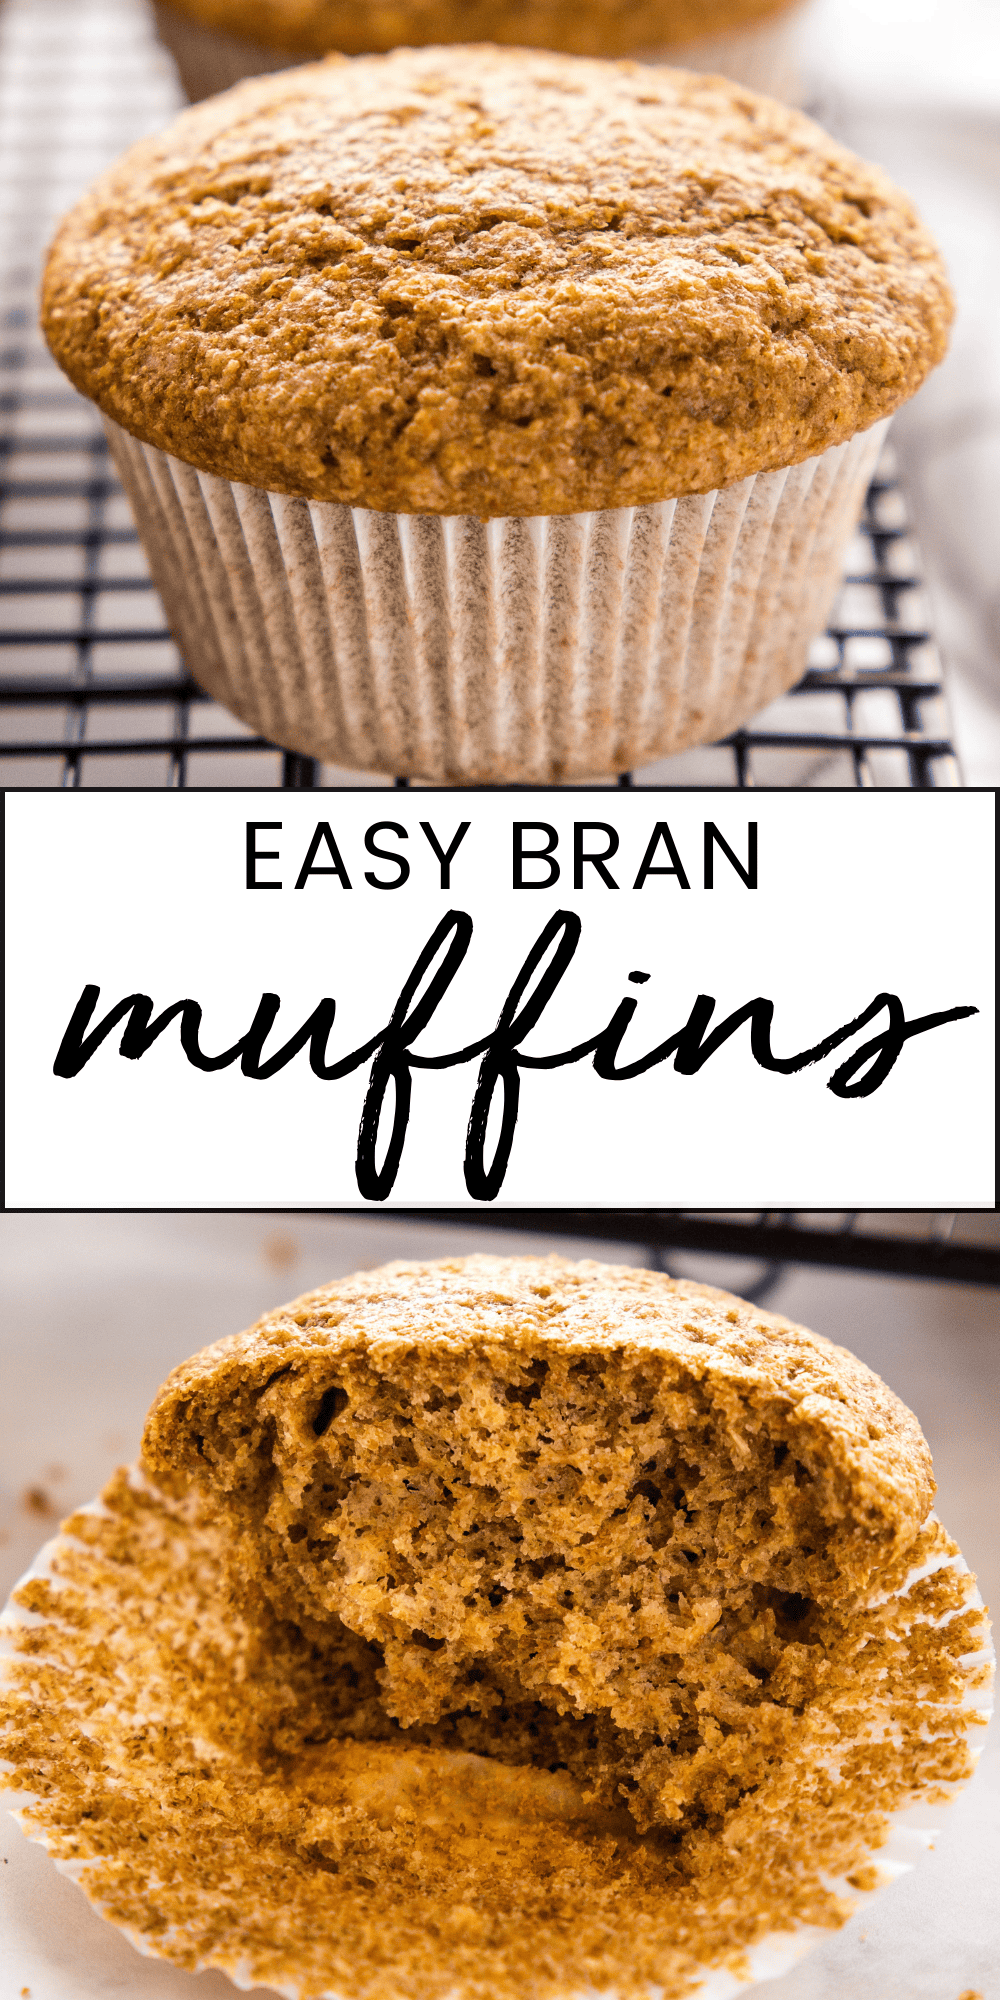 This Bran Muffins recipe makes the perfect healthy bran muffins that are high in fibre. They make a great grab-and-go breakfast or a nutritious snack, and they're easy to make in under 30 minutes. Follow our pro-tips for the perfect muffins every time! Recipe from thebusybaker.ca! #branmuffins #branmuffinrecipe #branmuffinsrecipe #muffinswithbran #diabeticfriendly #diabeticmuffins #healthymuffins #breakfast #breakfastmuffins via @busybakerblog